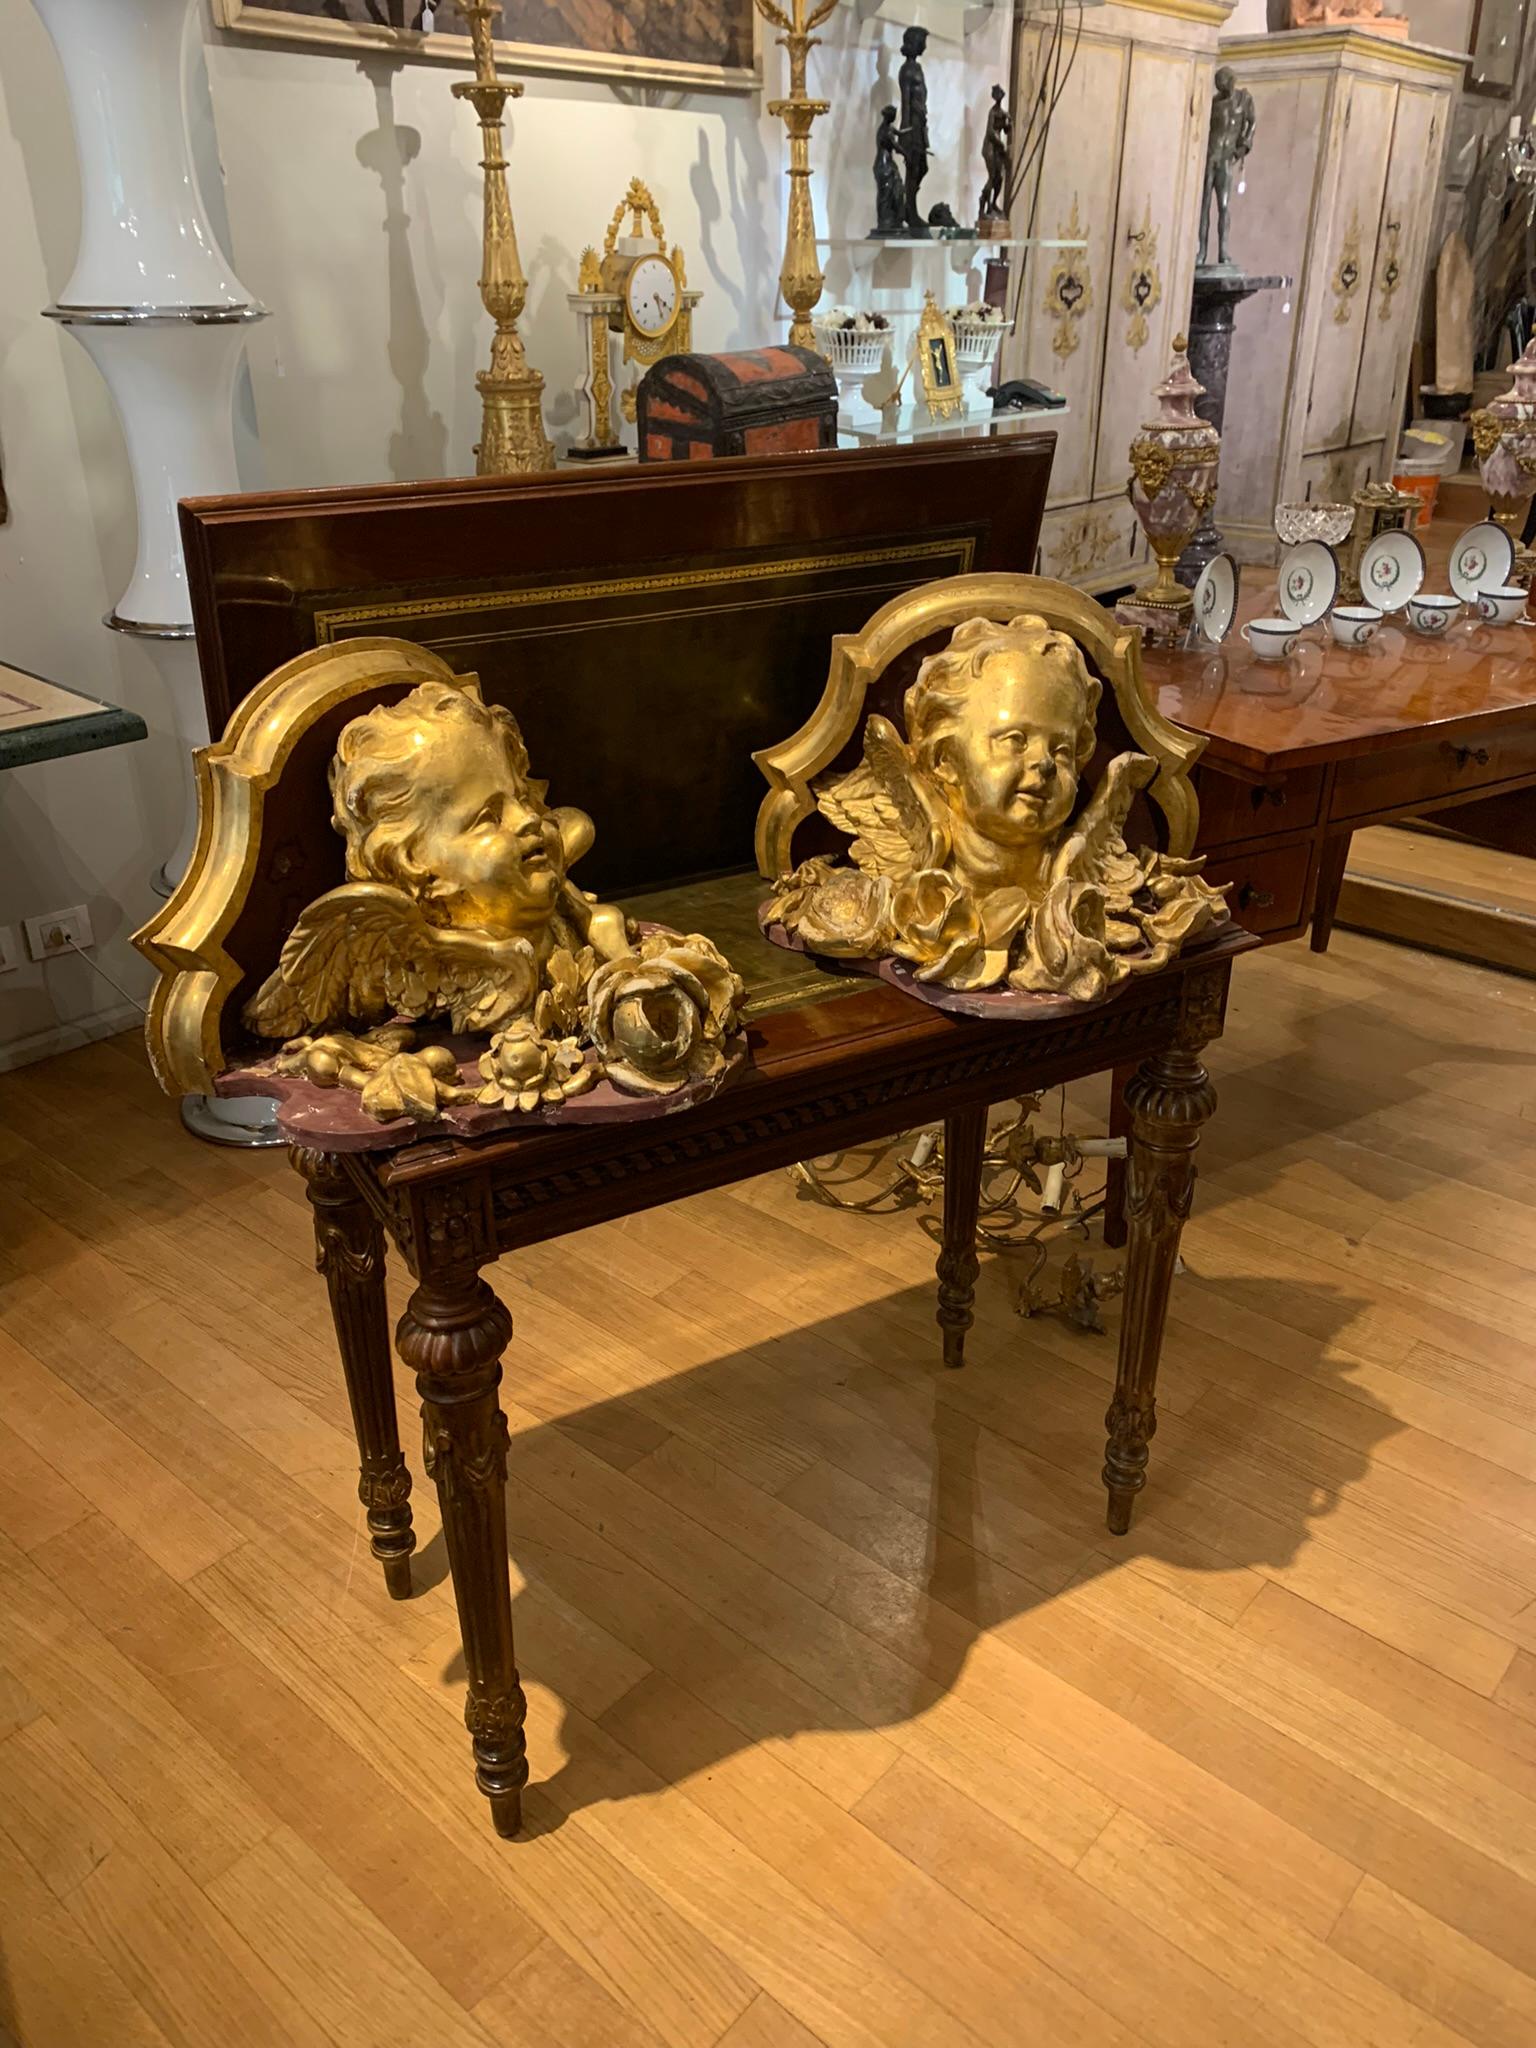 Pair of large wall shelves supported by gilded wooden sculptures depicting winged cherub heads with floral decorations.
Wooden top with arched plan, good state of conservation, if required only minor conservative restorations to be carried